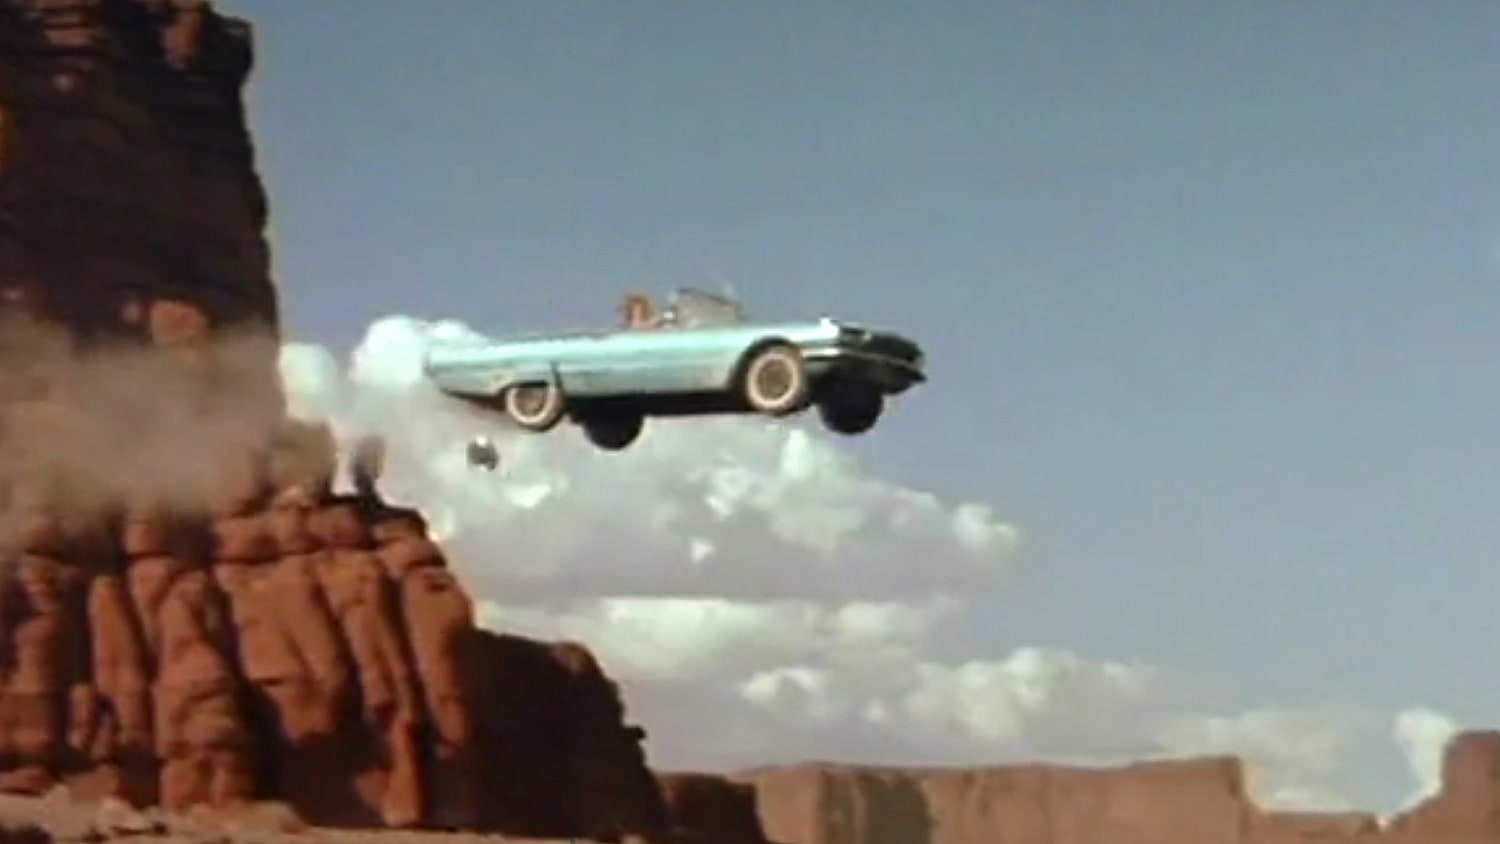 Thelma & Louise' almost had a completely different ending